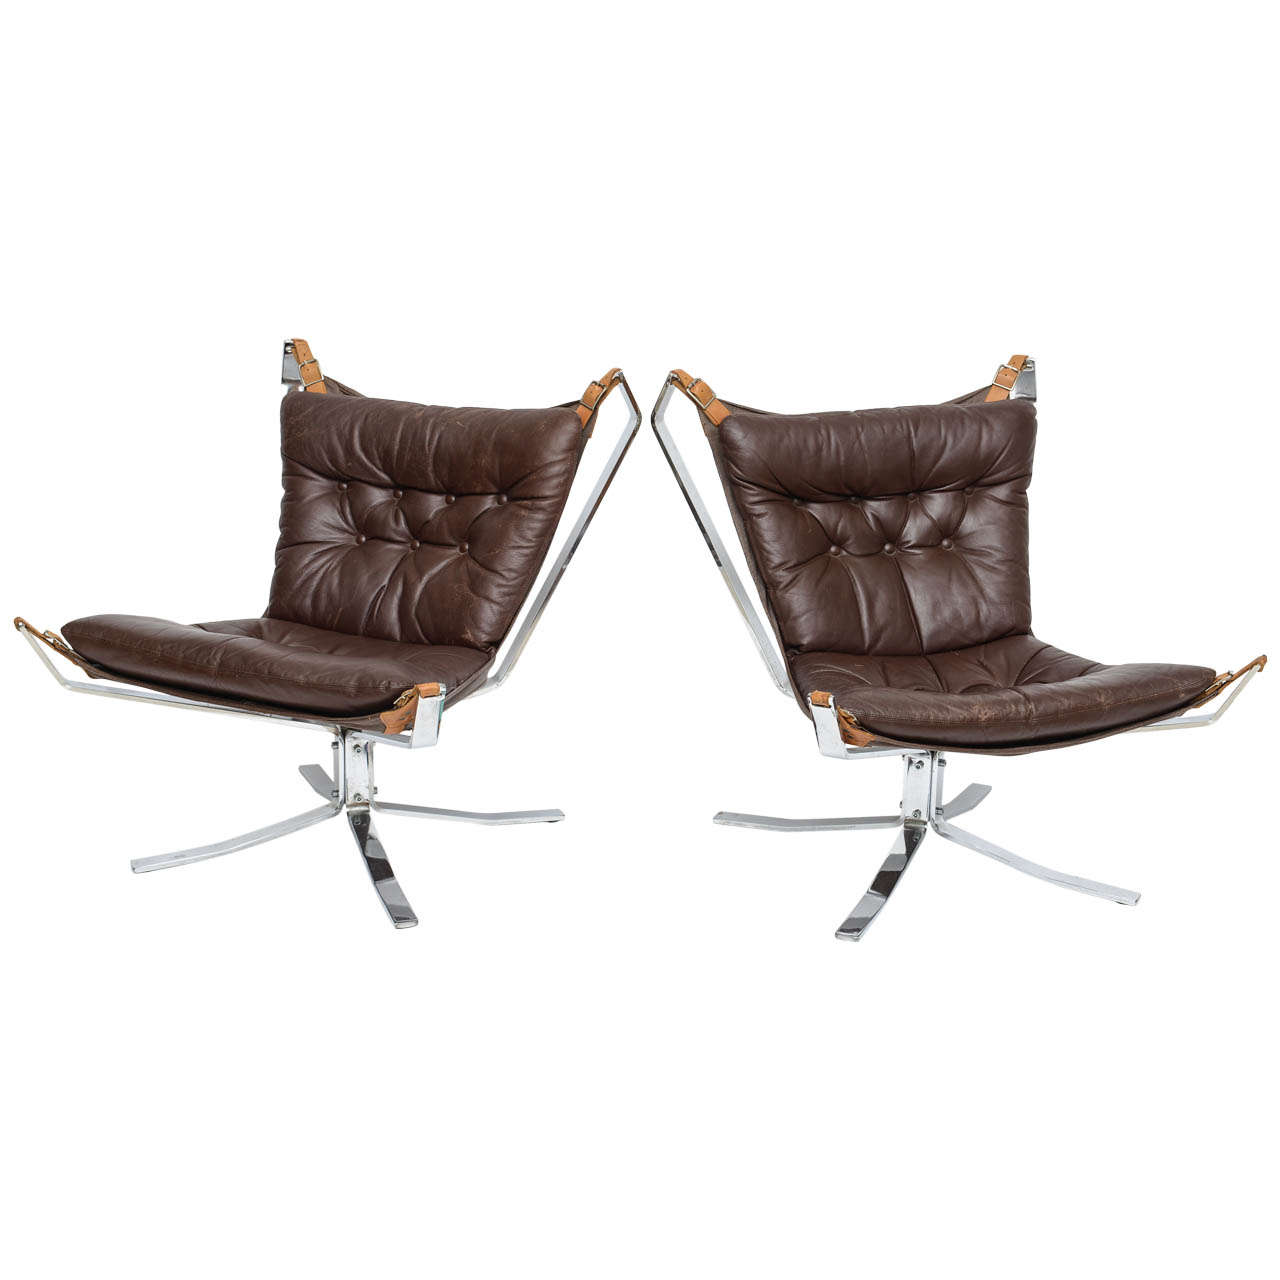 A Pair of Sigurd Resell Chrome and Leather Falcon Chairs, Finland